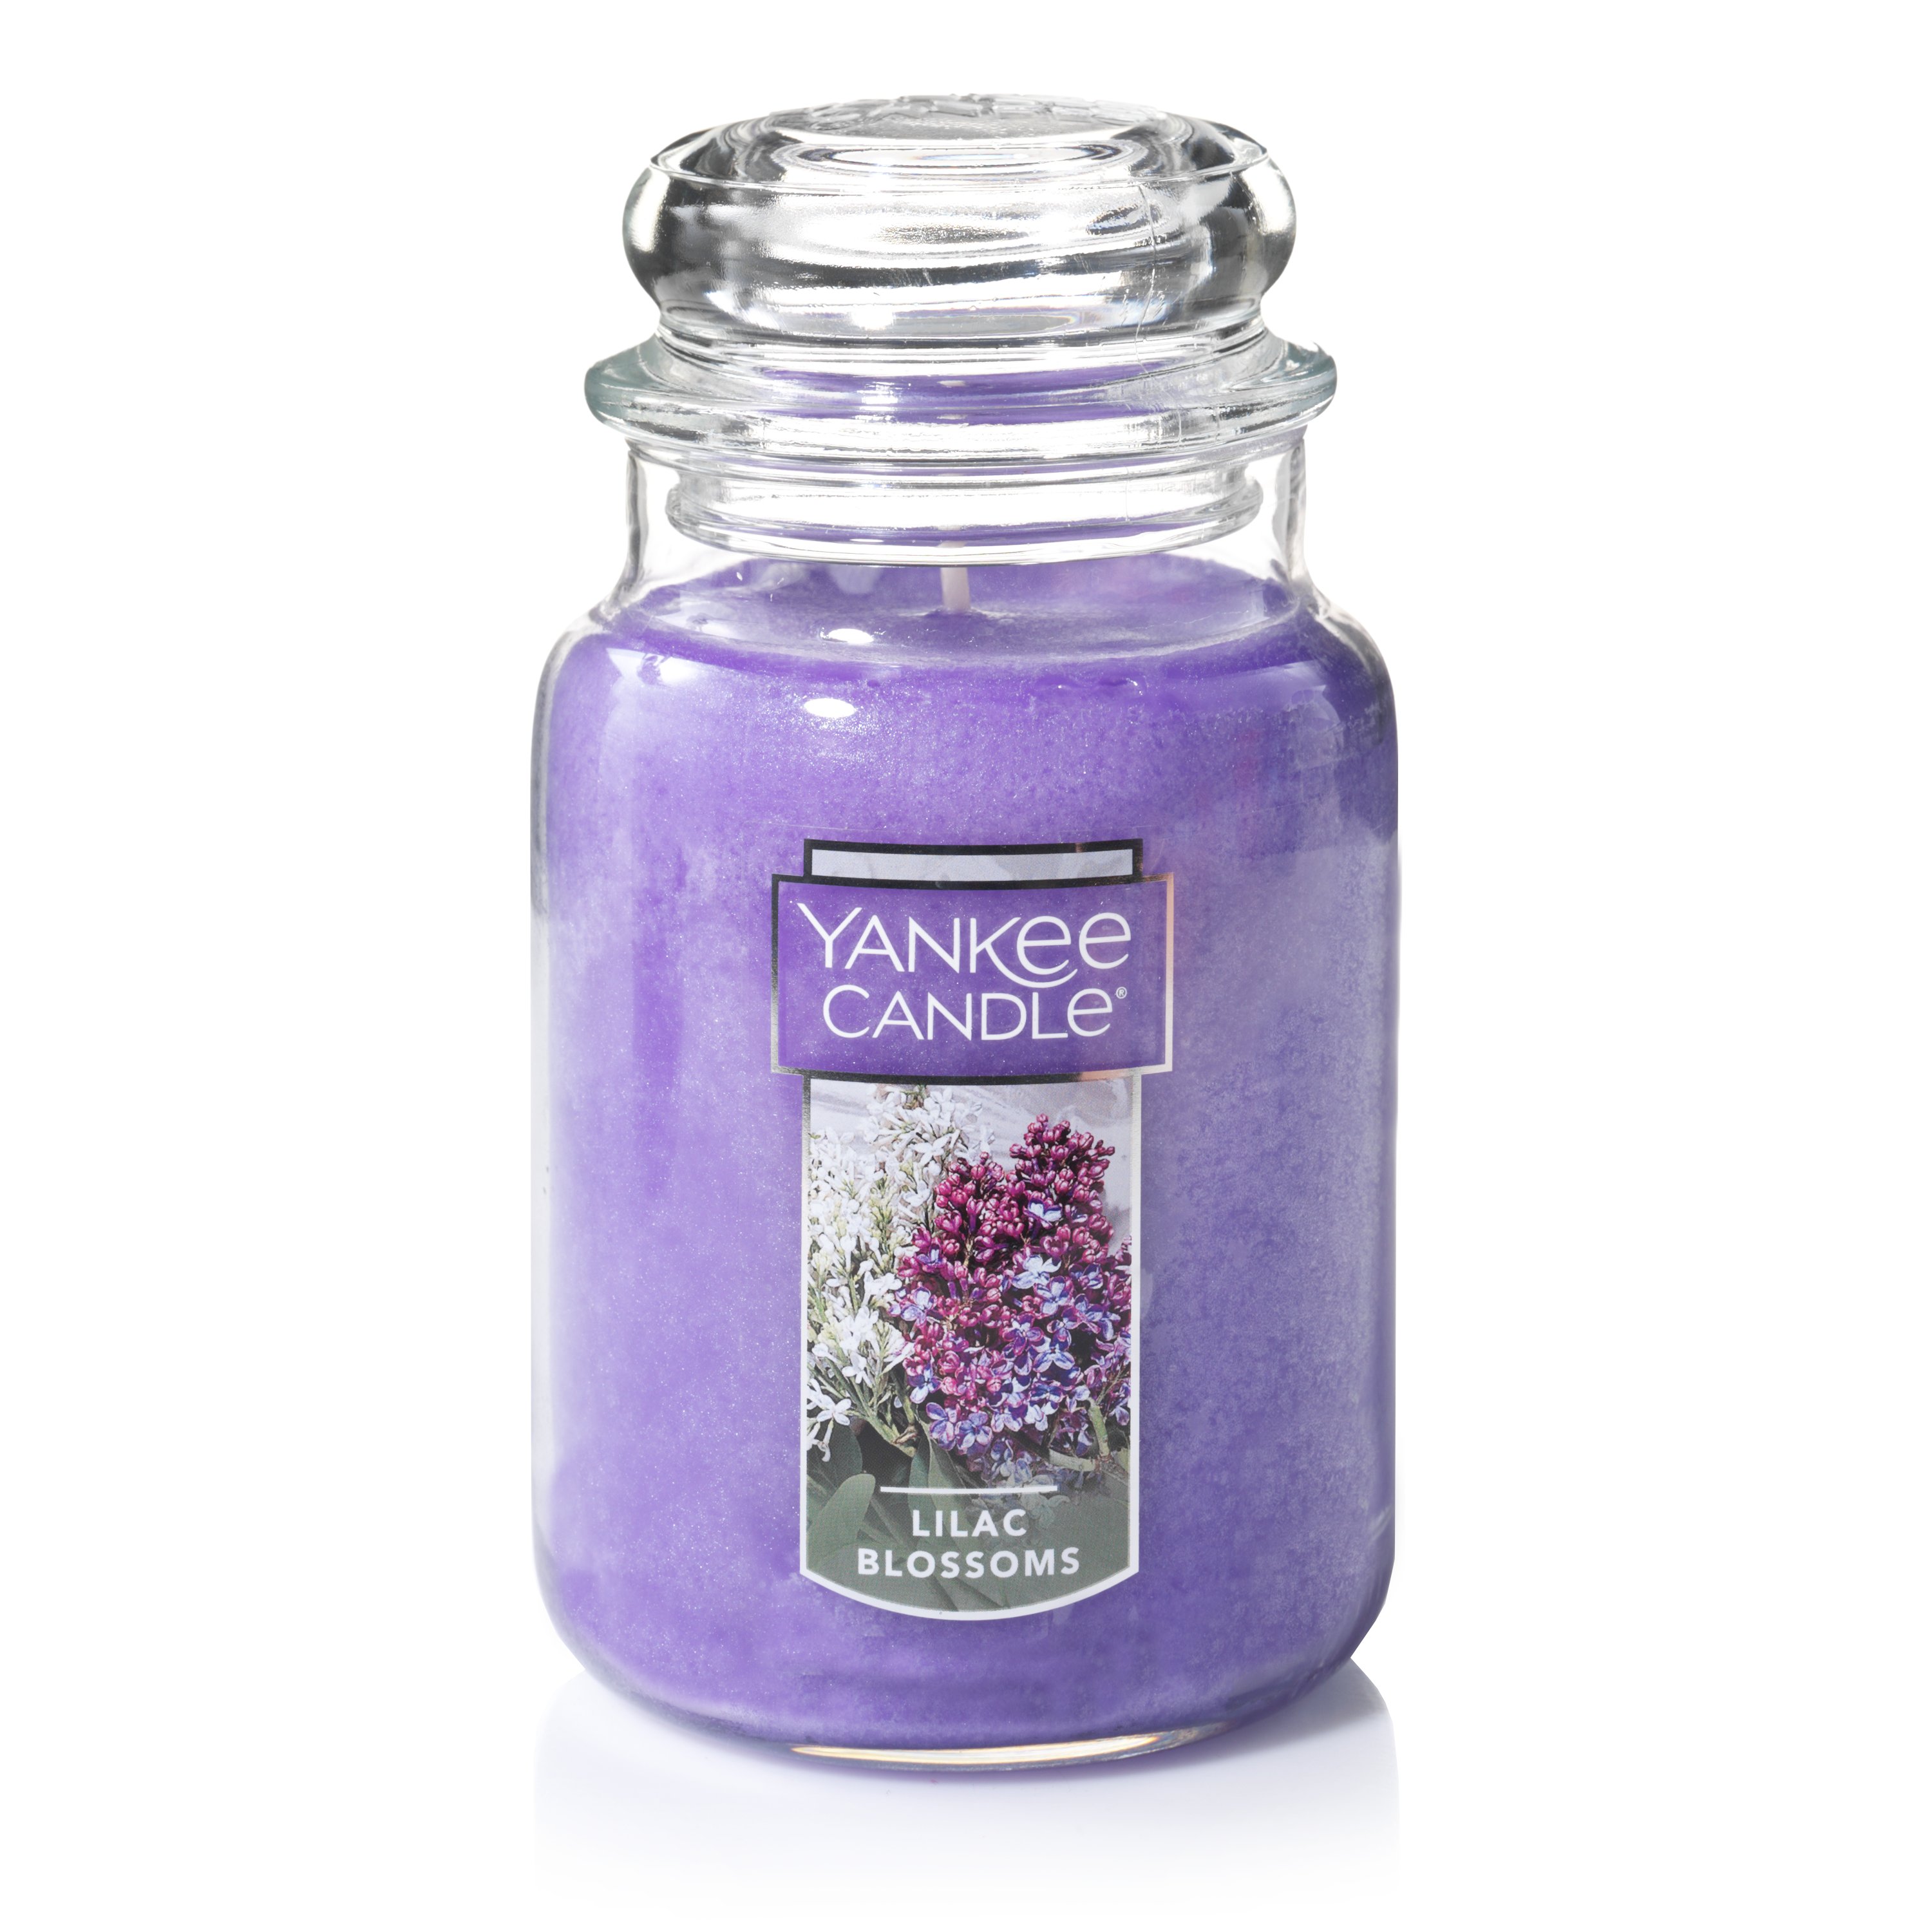 Yankee Candle Large Jar Candle Lilac Blossoms 